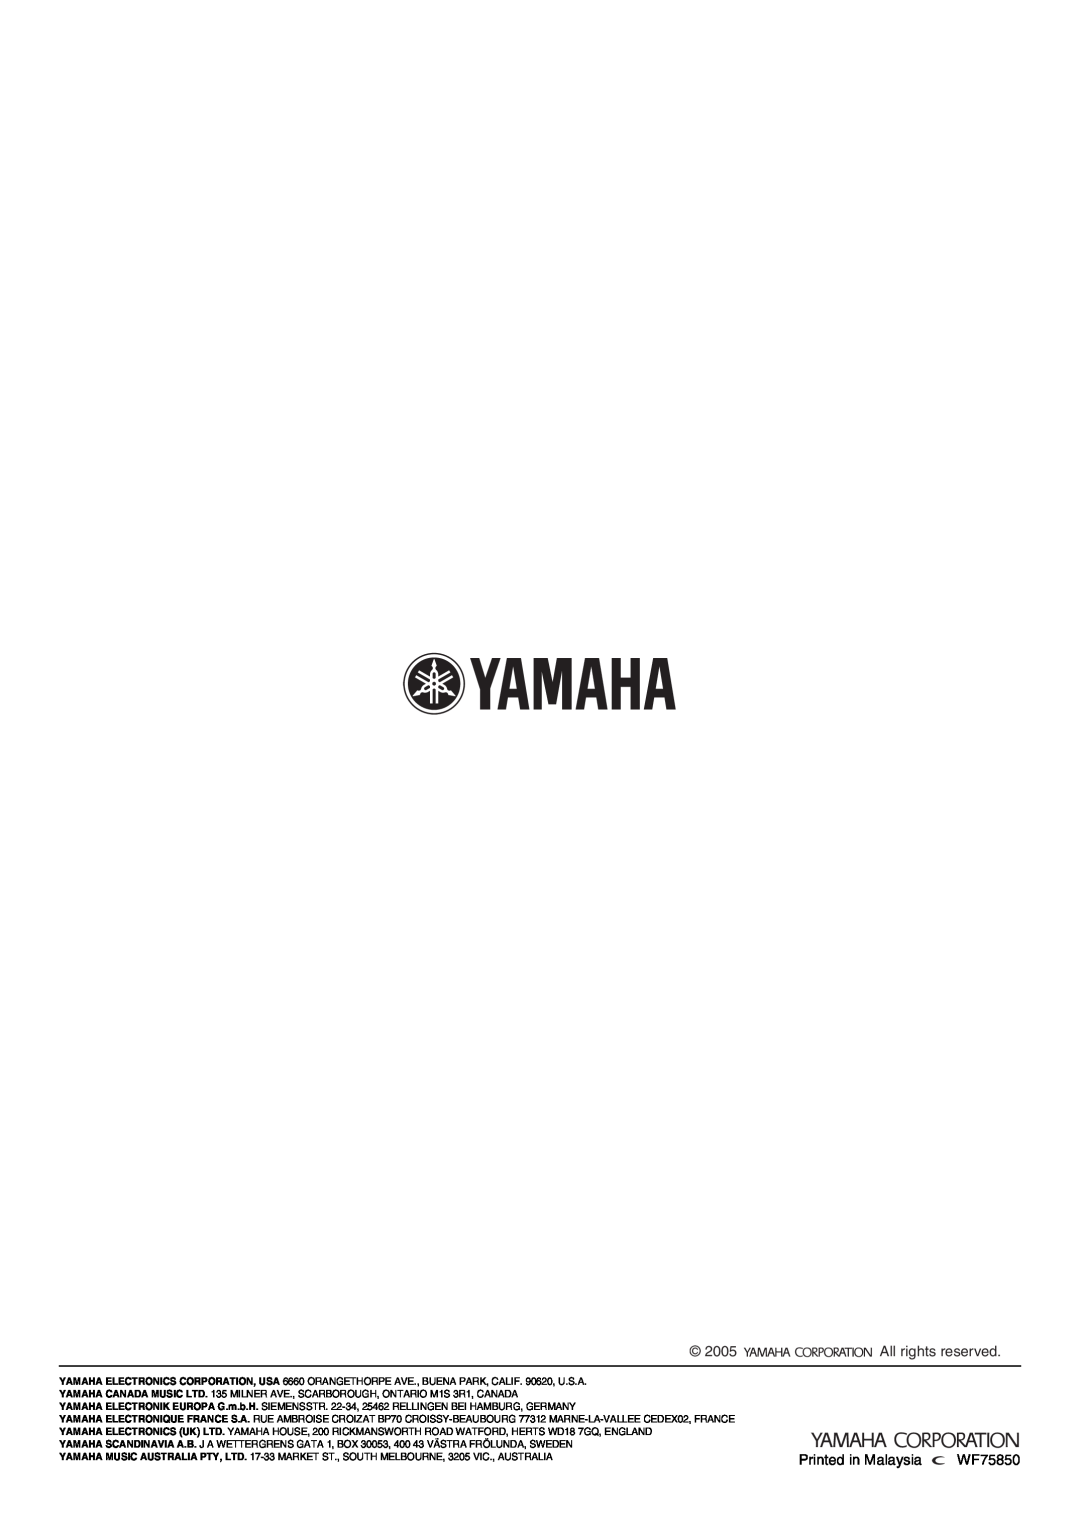 Yamaha AVX-S30 owner manual All rights reserved, Printed in Malaysia, WF75850 